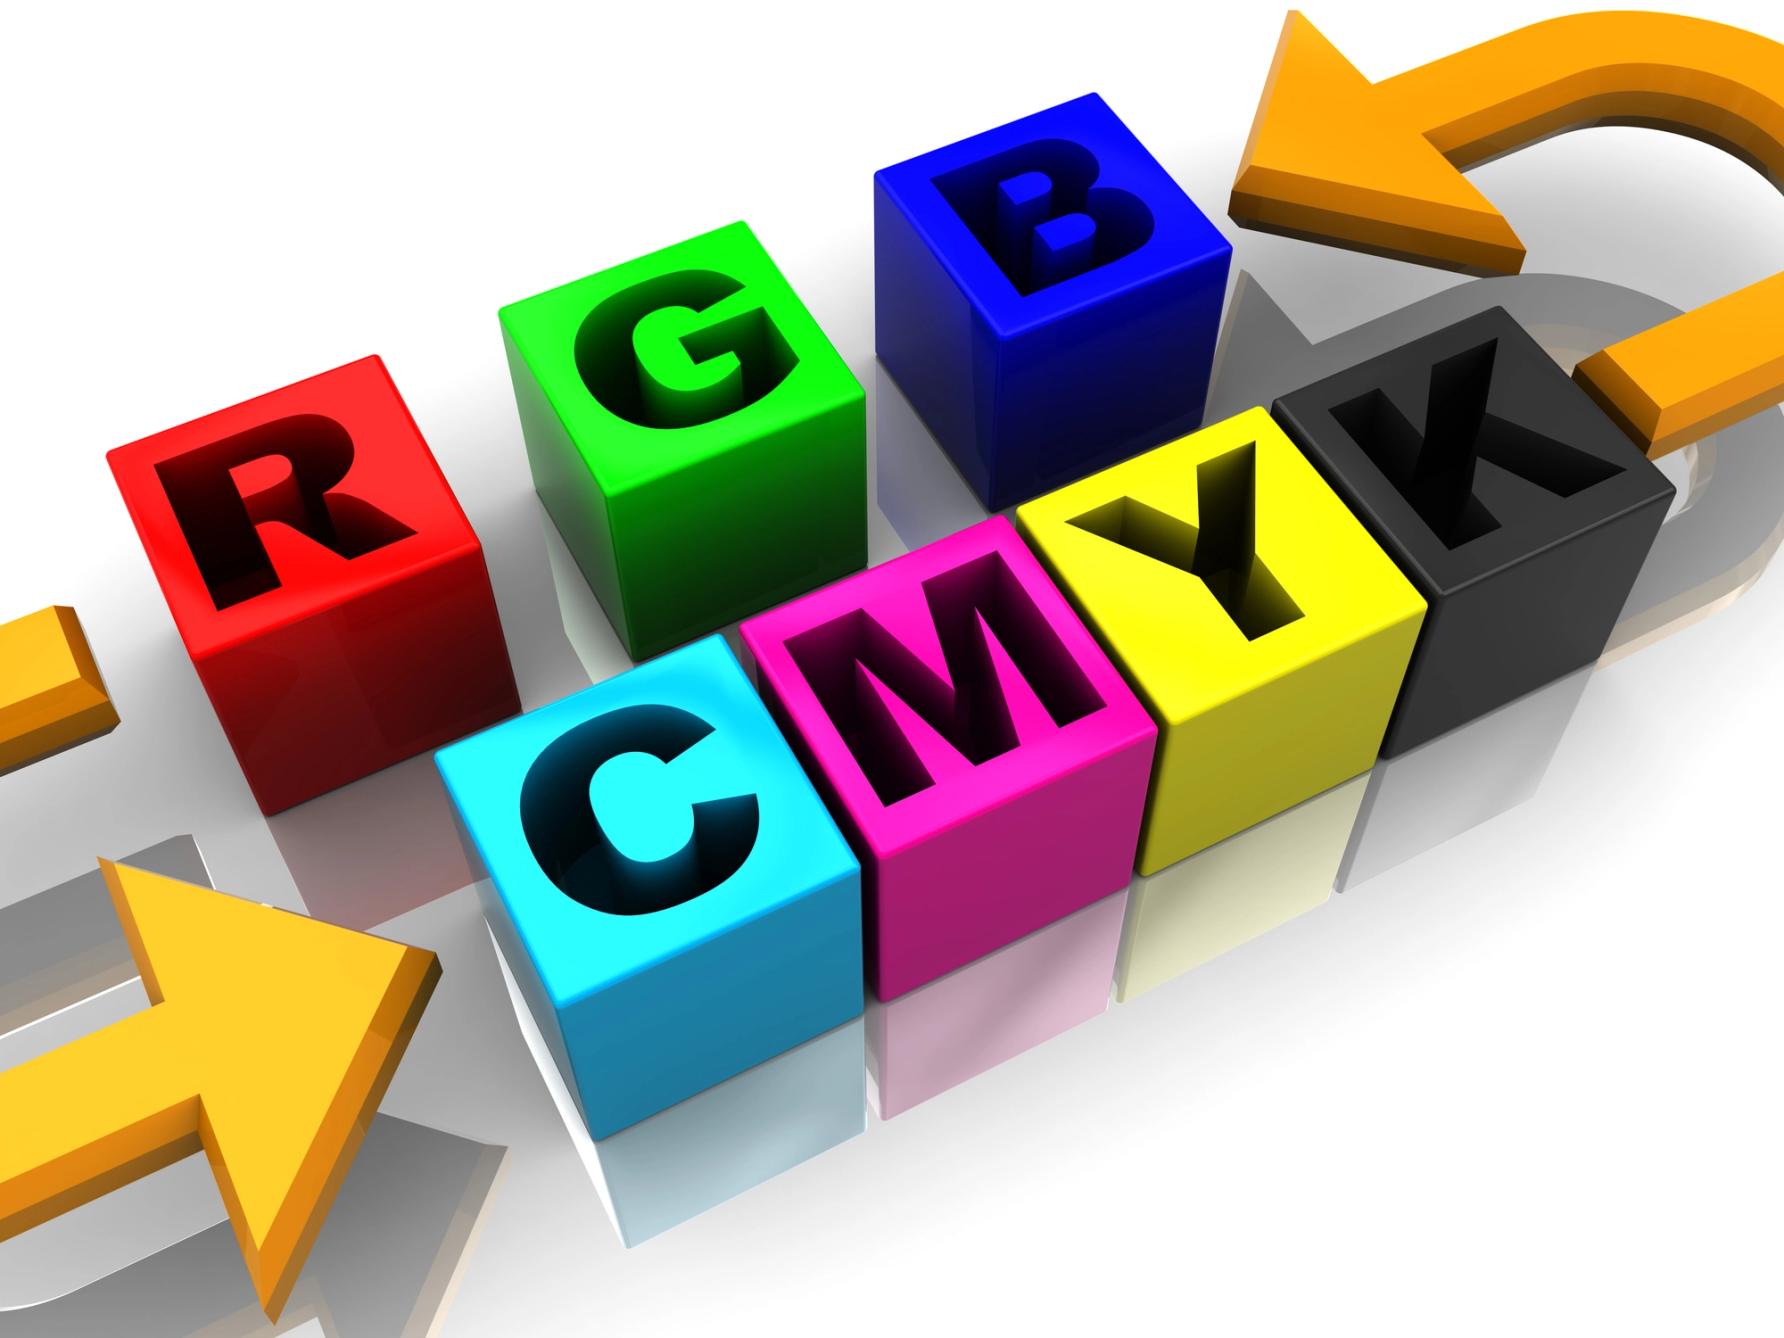 Converting between RGB and CMYK color modes